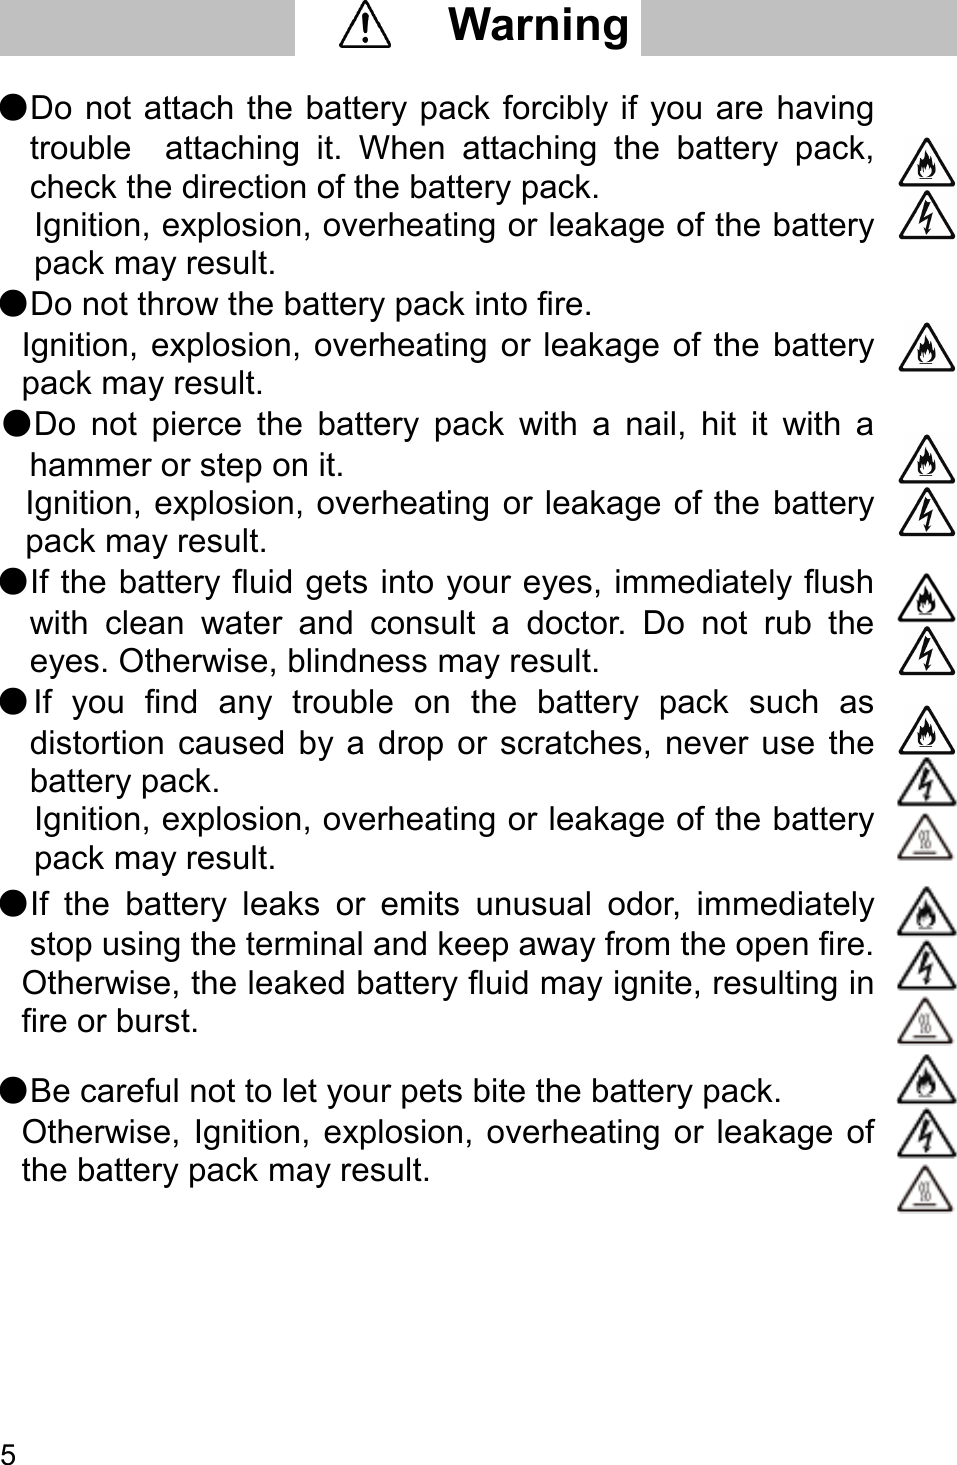   5       ●Do not attach the battery pack forcibly if you are having trouble    attaching  it.  When  attaching  the  battery  pack, check the direction of the battery pack.   Ignition, explosion, overheating or leakage of the battery pack may result.  ●Do not throw the battery pack into fire.   Ignition, explosion, overheating or leakage of the  battery pack may result.  ●Do  not  pierce  the  battery  pack  with  a  nail,  hit  it  with  a hammer or step on it. Ignition, explosion, overheating or leakage of the battery pack may result.  ●If the battery fluid gets into your eyes, immediately flush with  clean  water  and  consult  a  doctor.  Do  not  rub  the eyes. Otherwise, blindness may result.  ●If  you  find  any  trouble  on  the  battery  pack  such  as distortion  caused  by a drop  or  scratches,  never use  the   battery pack.   Ignition, explosion, overheating or leakage of the battery pack may result.  ●If  the  battery  leaks  or  emits  unusual  odor,  immediately stop using the terminal and keep away from the open fire. Otherwise, the leaked battery fluid may ignite, resulting in fire or burst.  ●Be careful not to let your pets bite the battery pack.   Otherwise,  Ignition,  explosion, overheating  or  leakage  of the battery pack may result.         Warning     